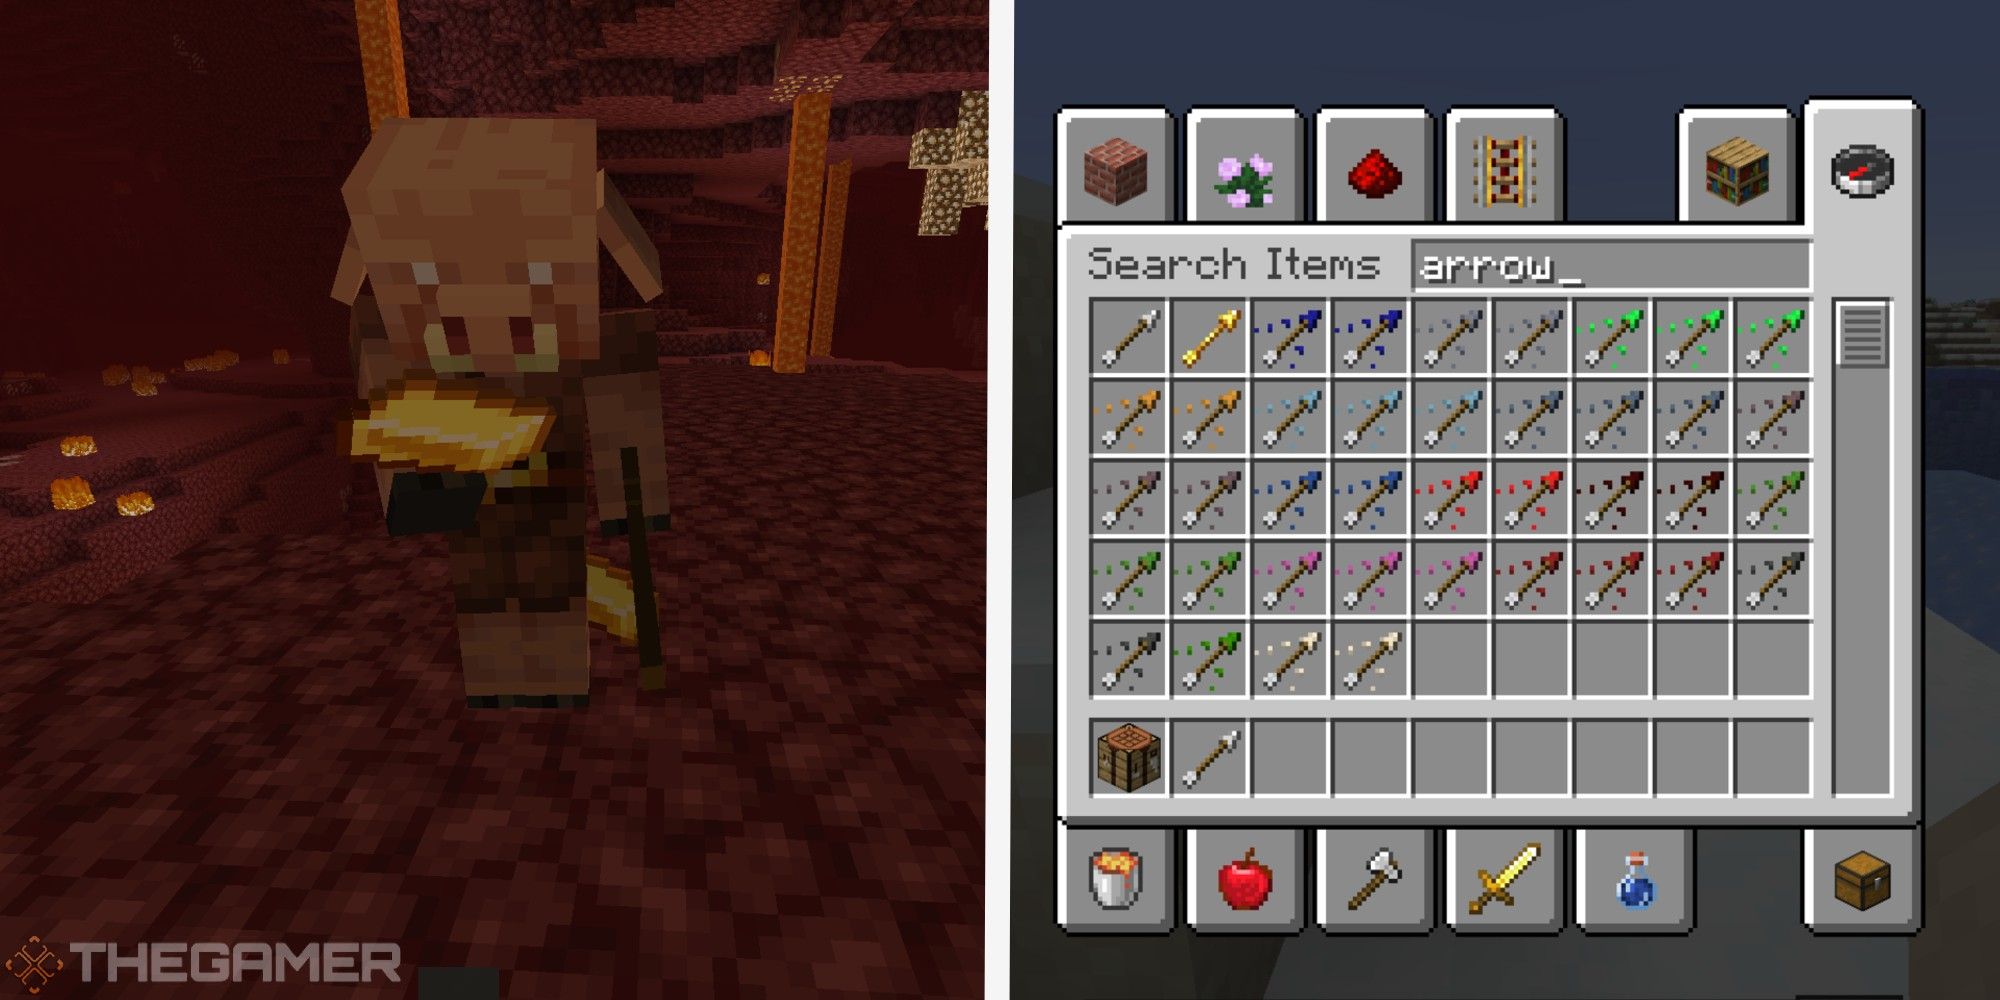 image of piglin looking at gold next to image of arrows in creative mode